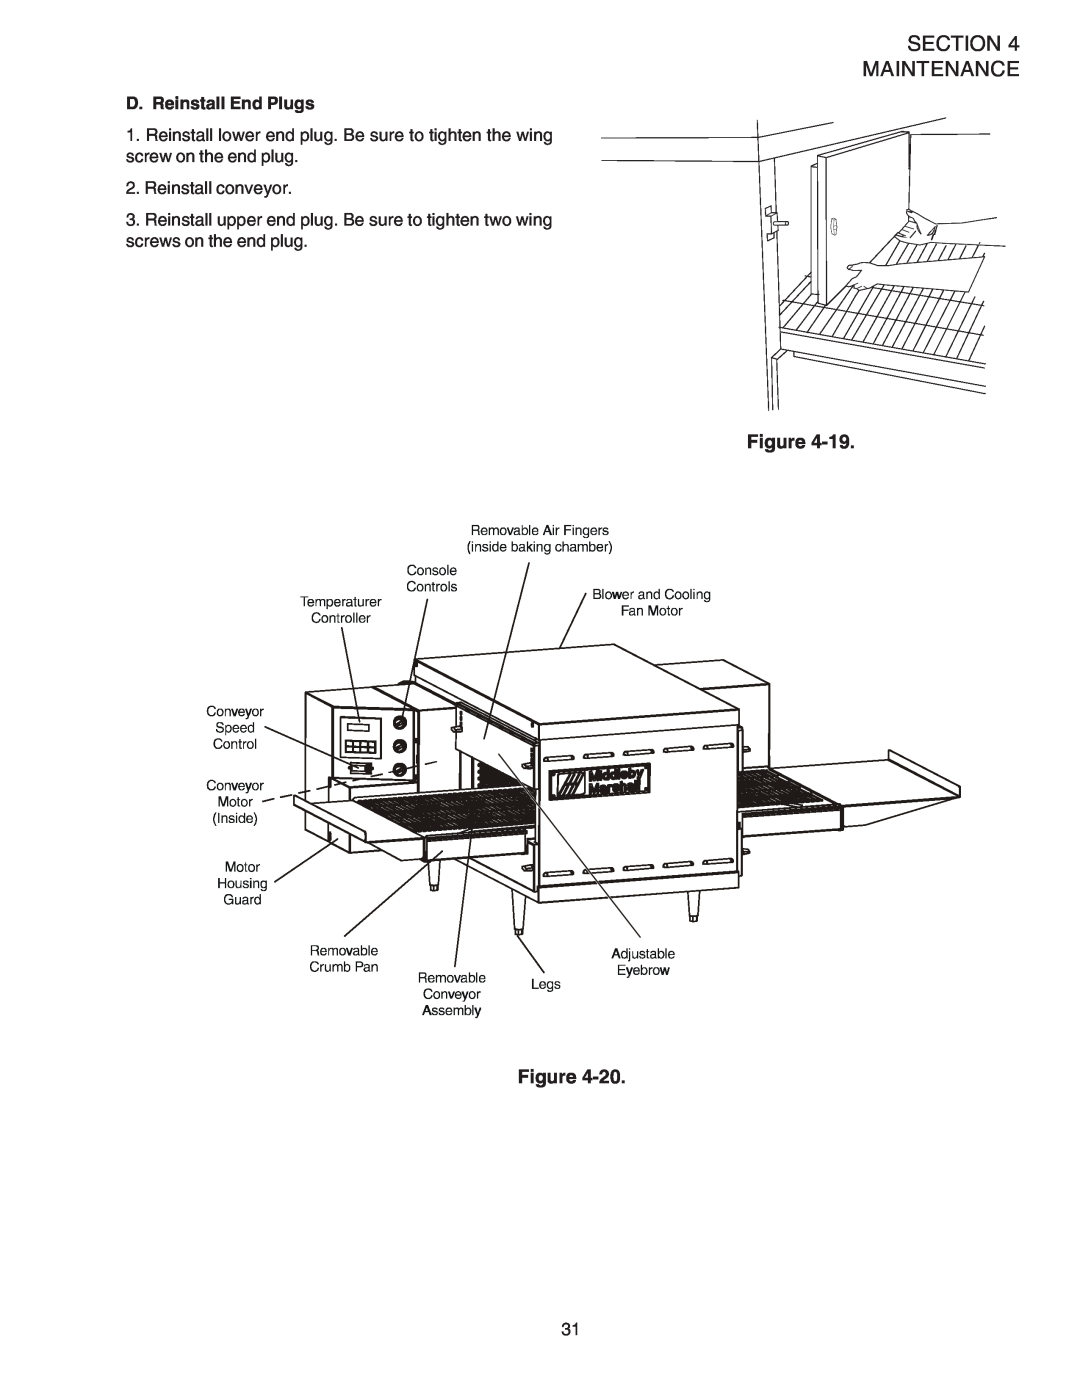 Middleby Marshall PS520 installation manual Section Maintenance, Figure Figure, D. Reinstall End Plugs, Reinstall conveyor 